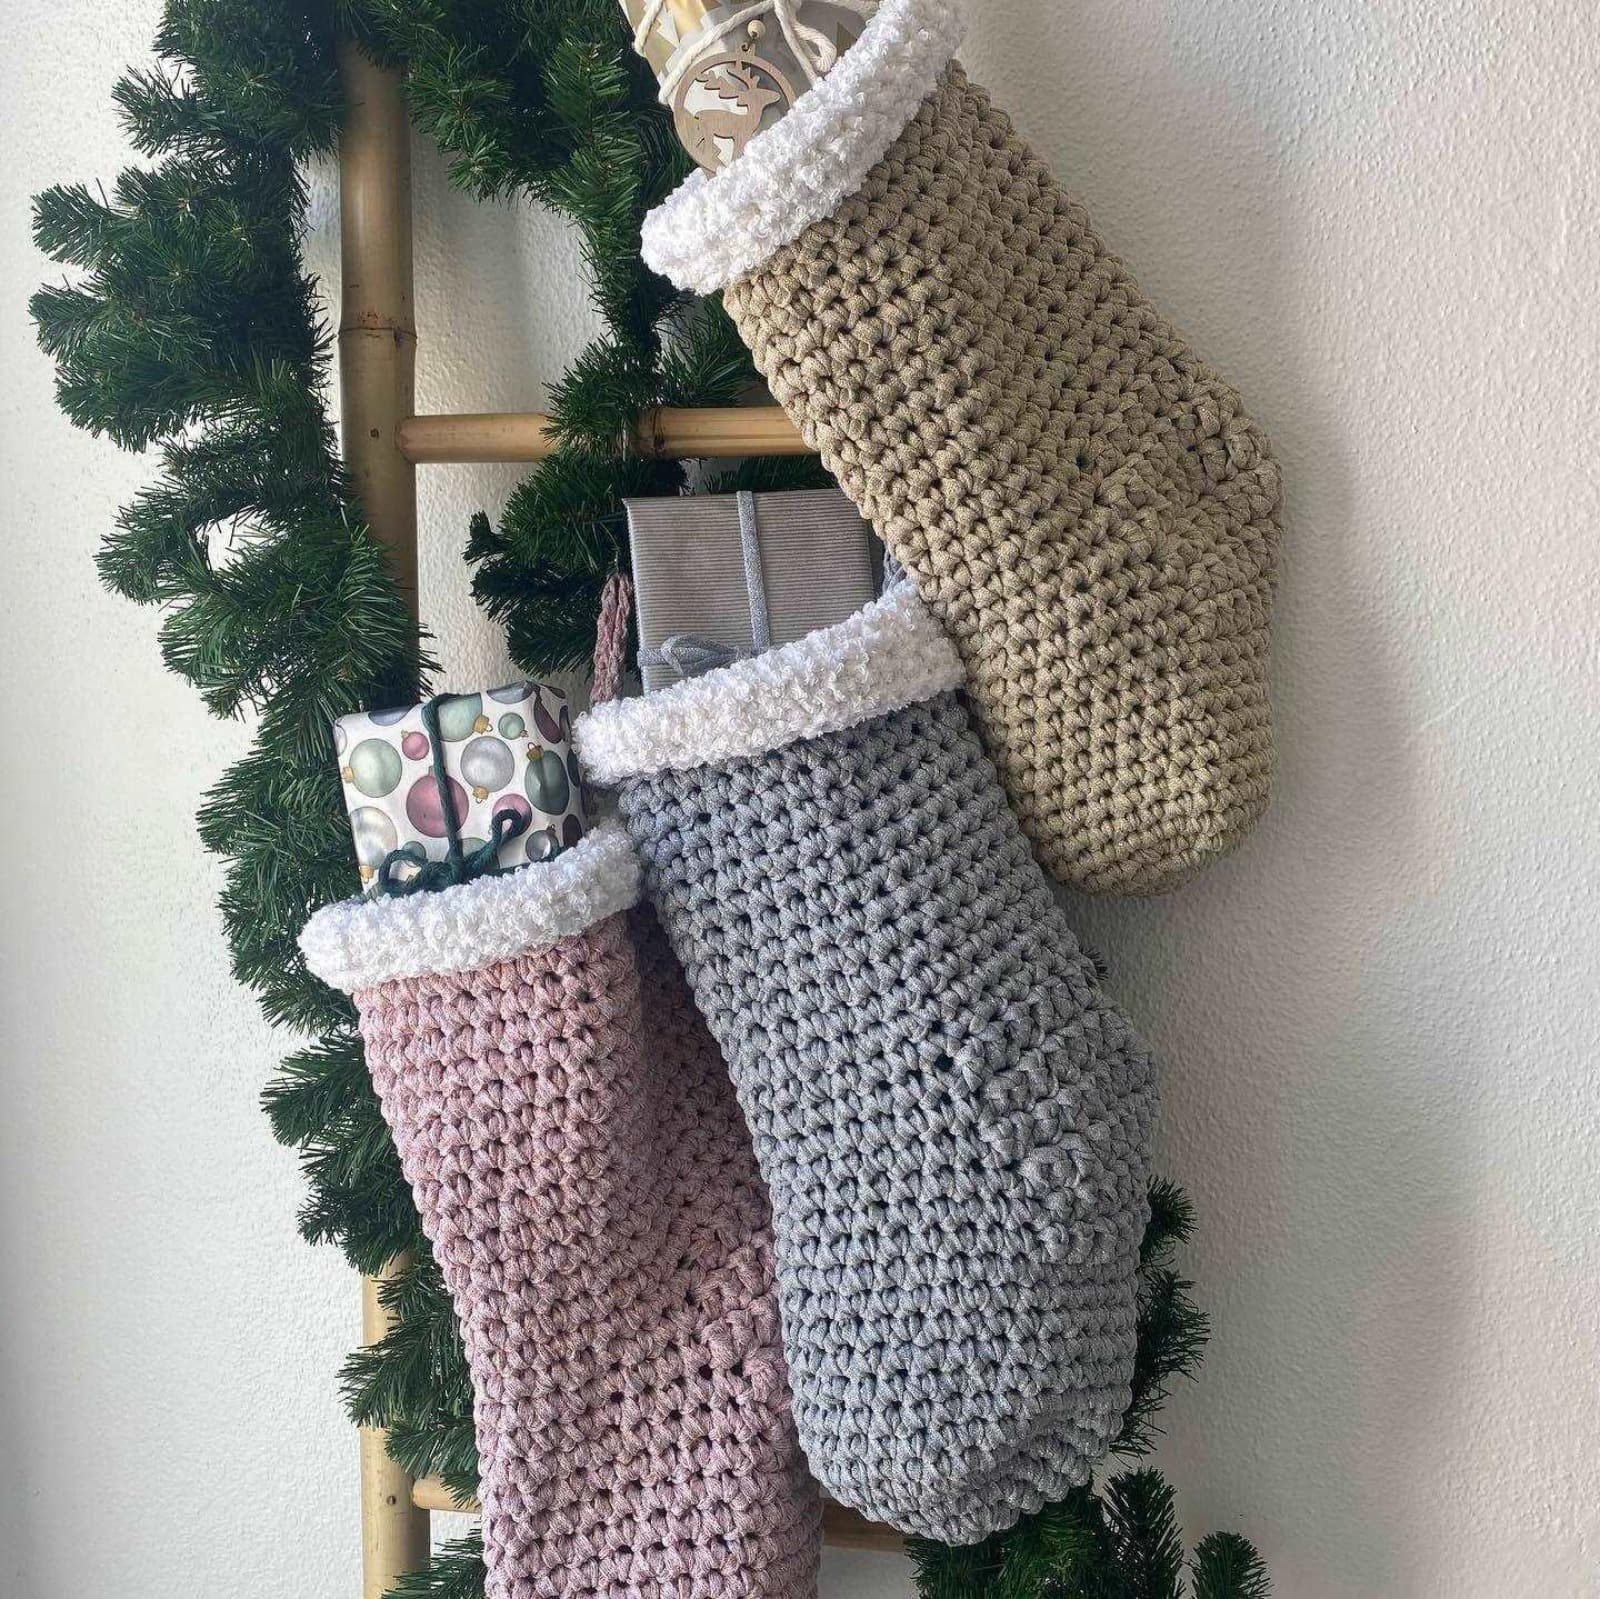 Chunky Knit Christmas Stocking - Silver Sparkly Christmas Decor - Looping Home